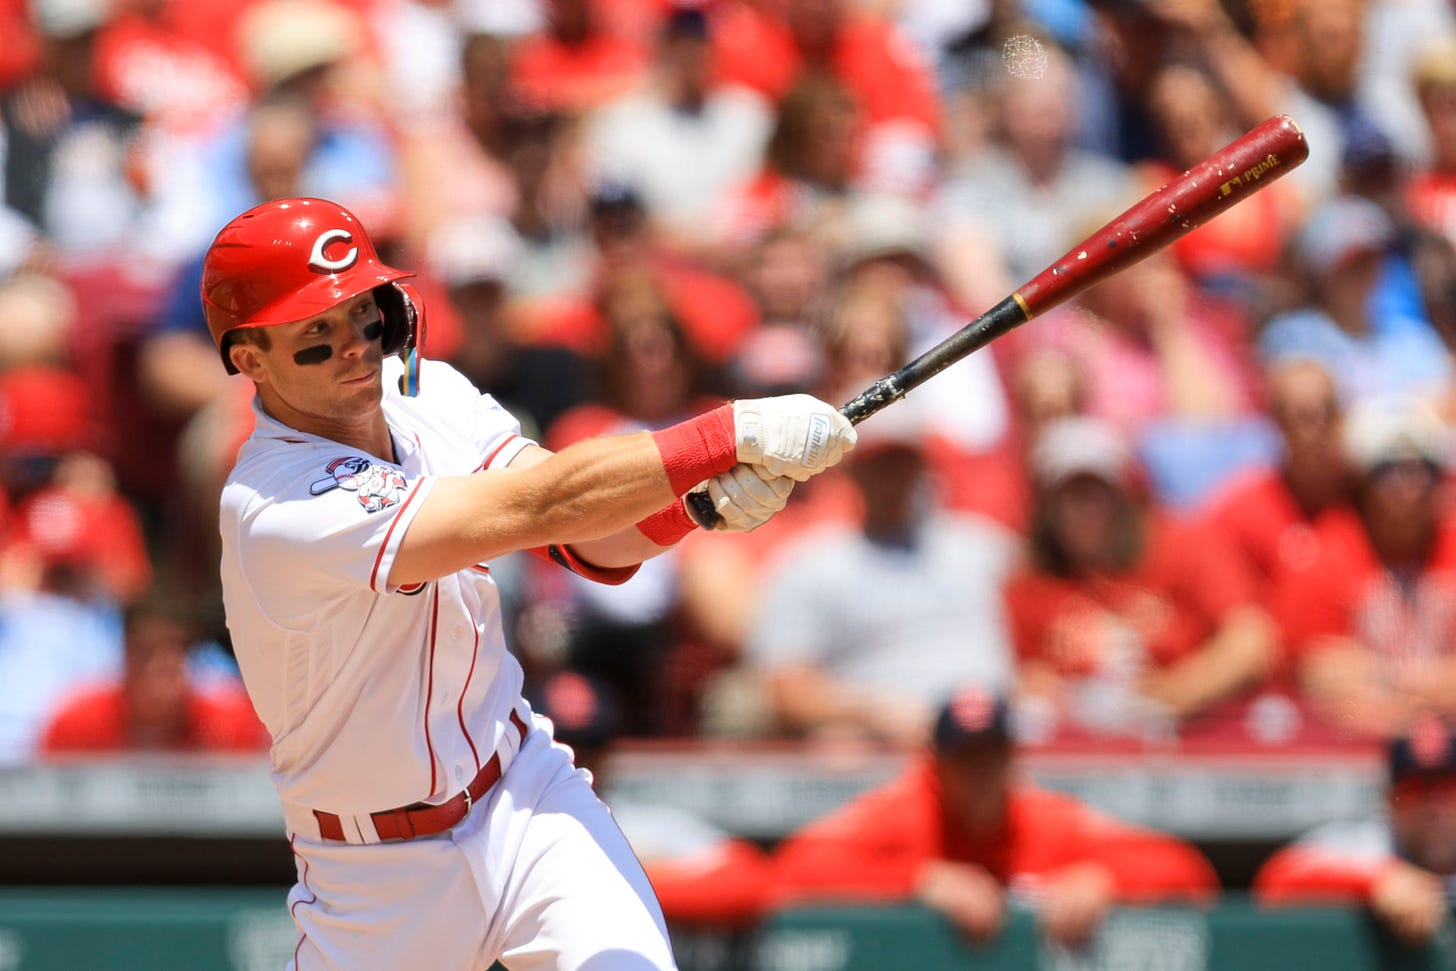 Reds rookie phenom named NL Player of the Week